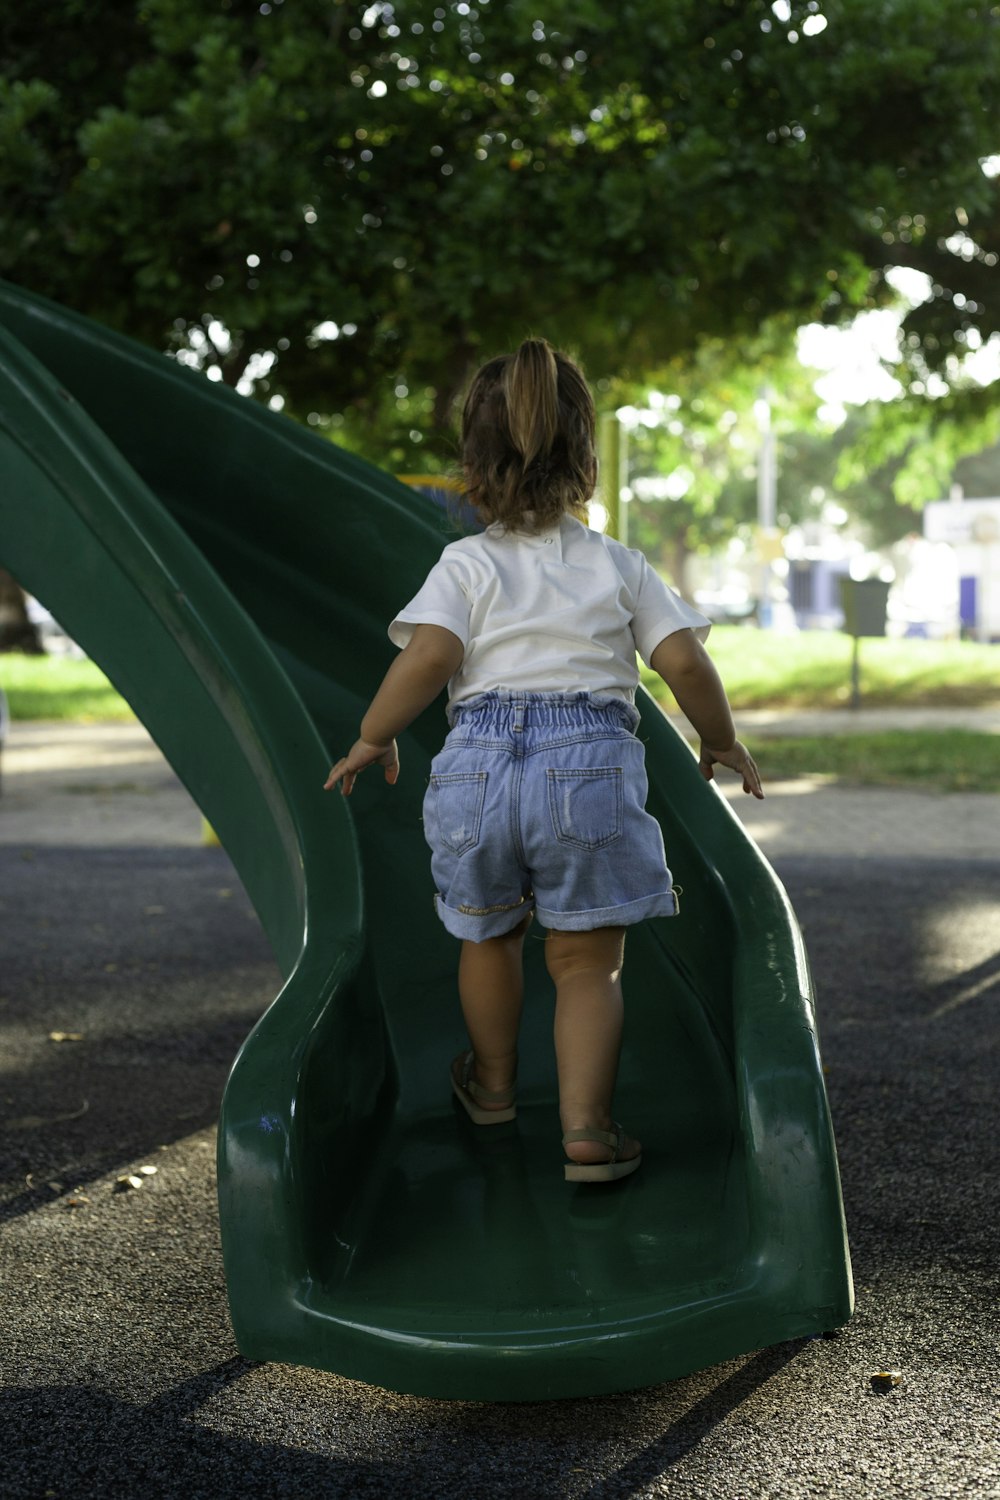 a little girl playing on a green slide